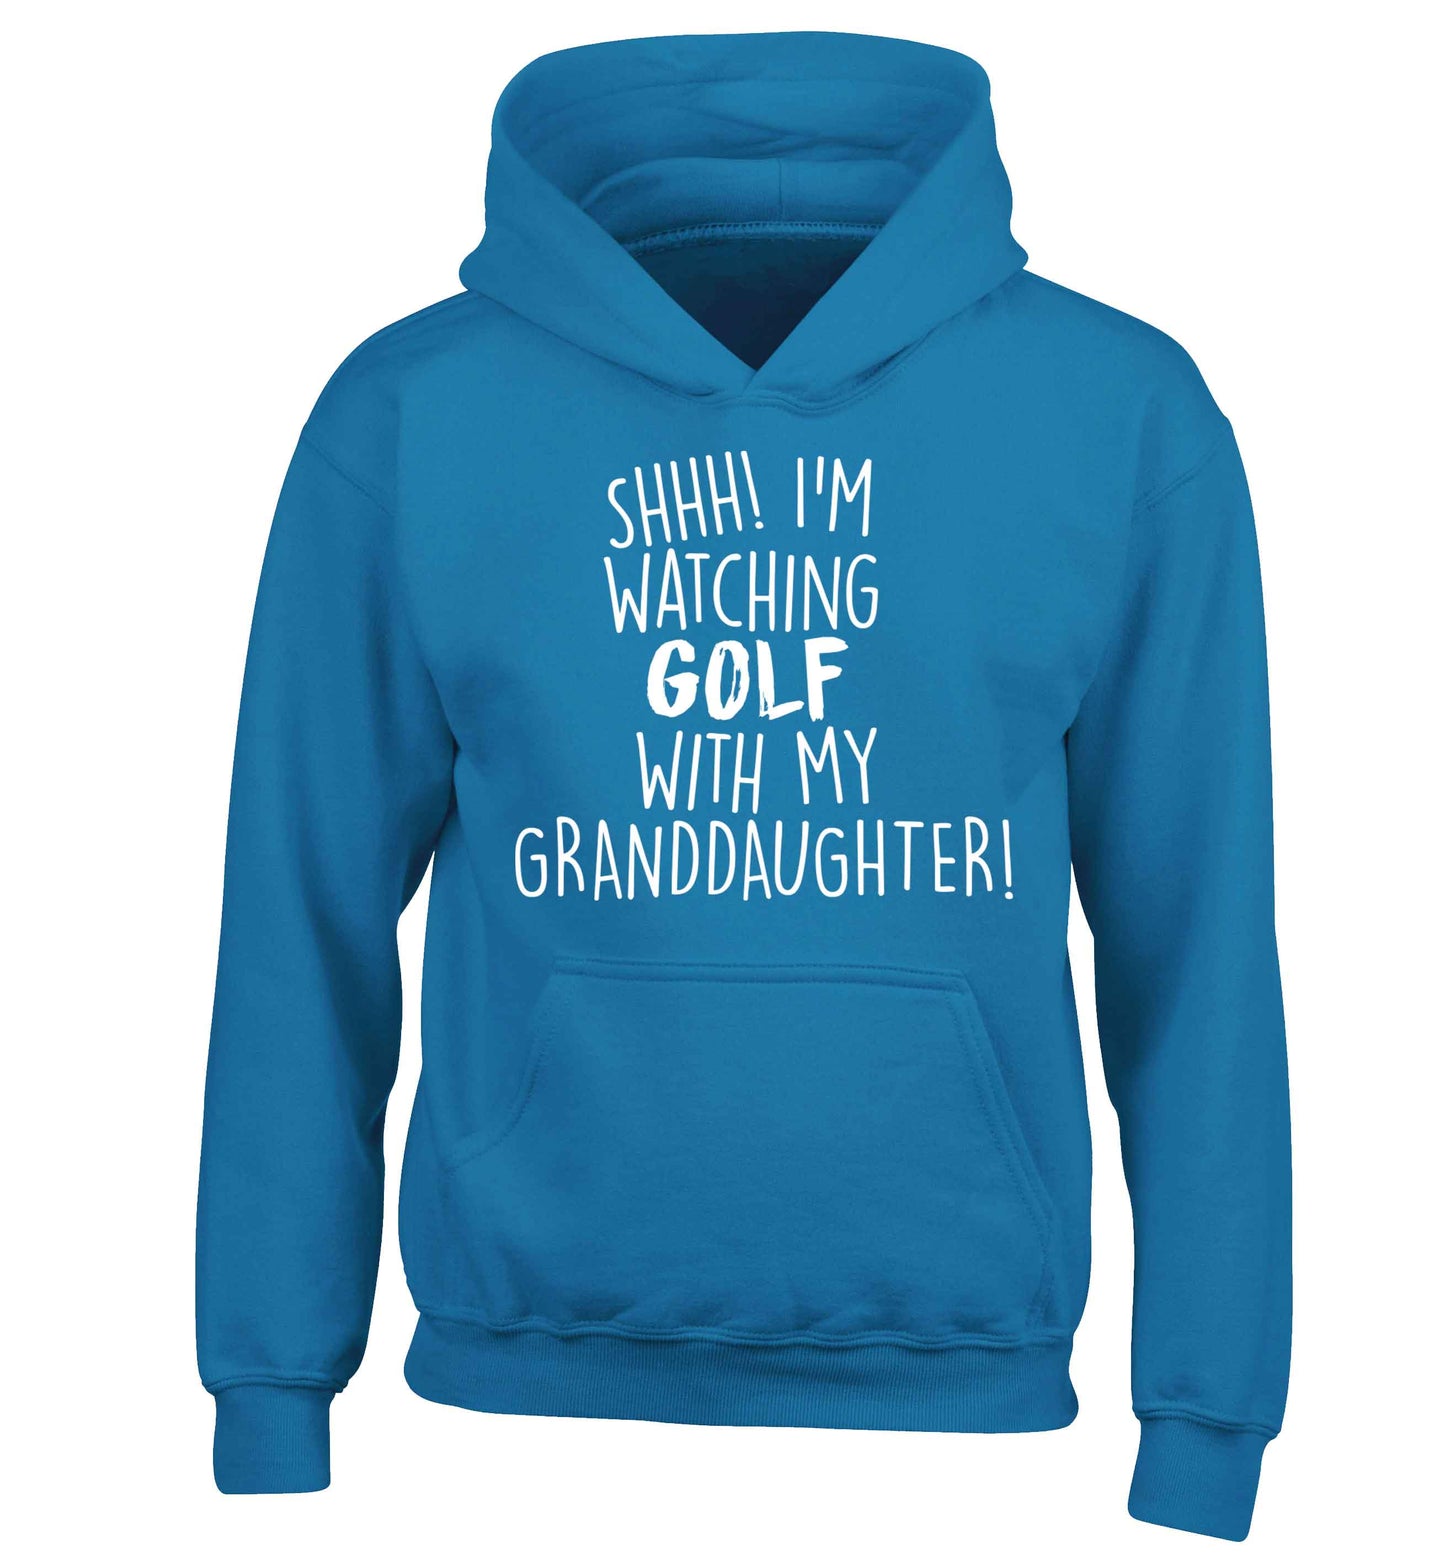 Shh I'm watching golf with my granddaughter children's blue hoodie 12-13 Years